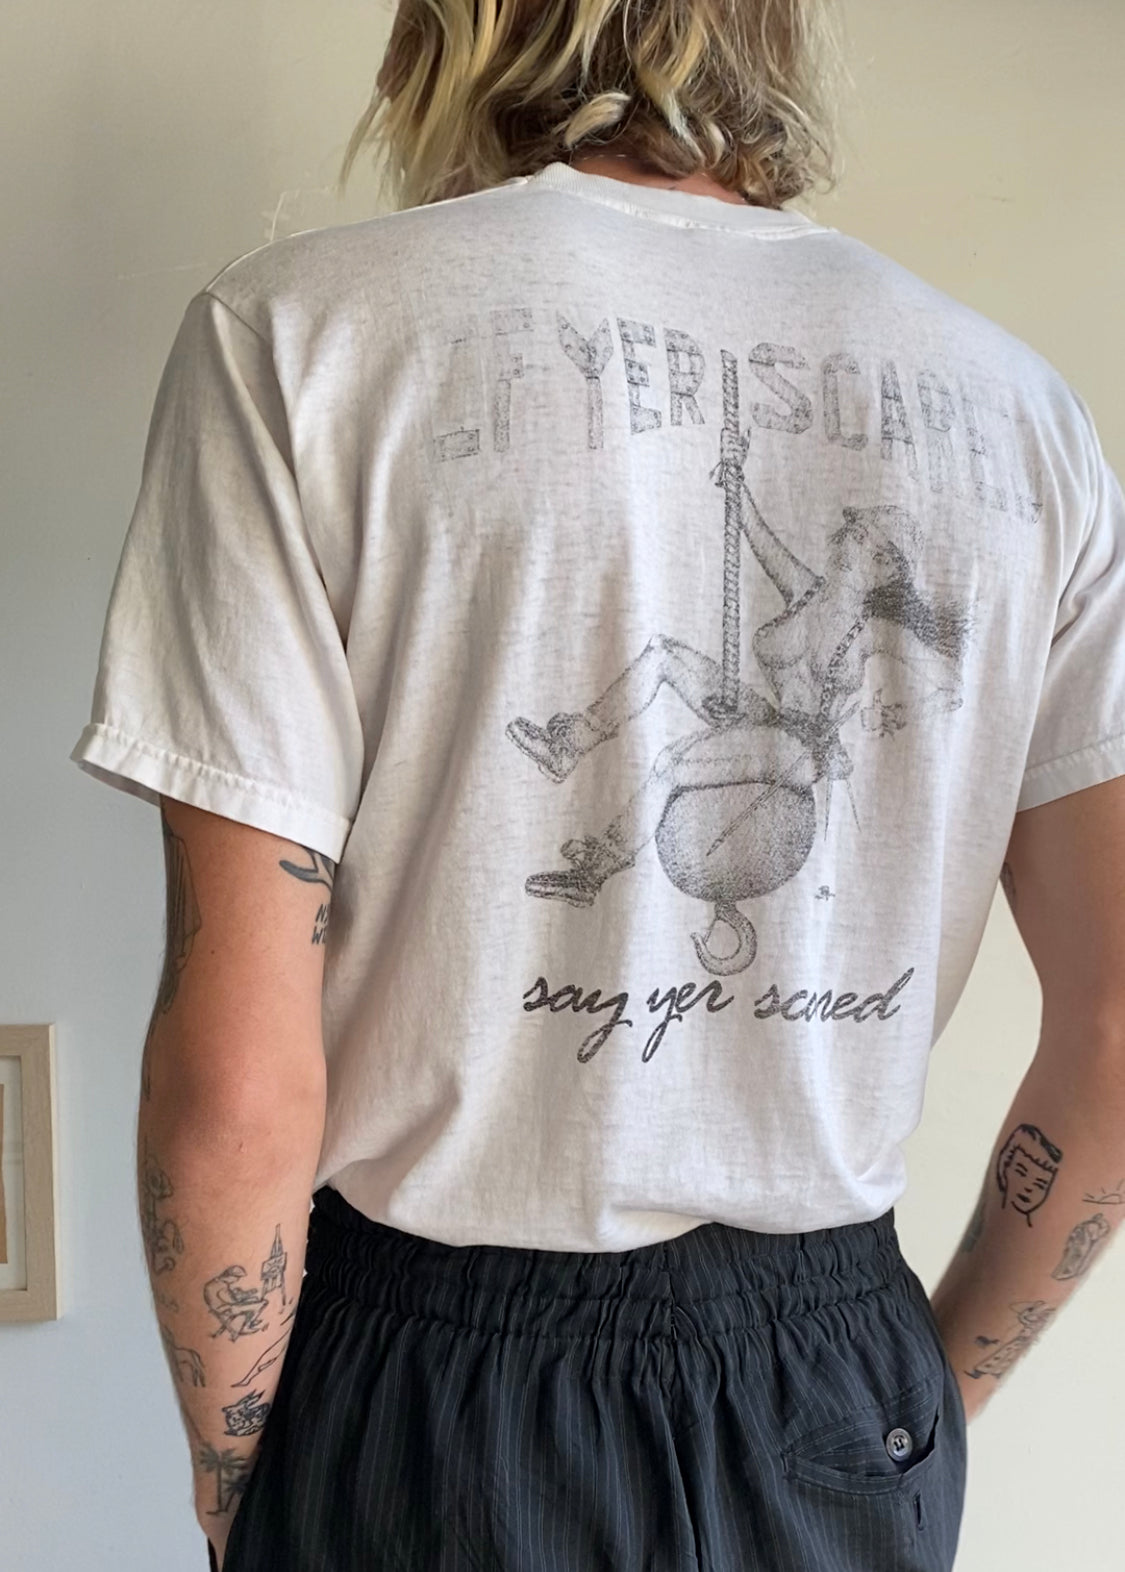 1990s "If Yer Scared, Say Yer Scared" Tee (M)